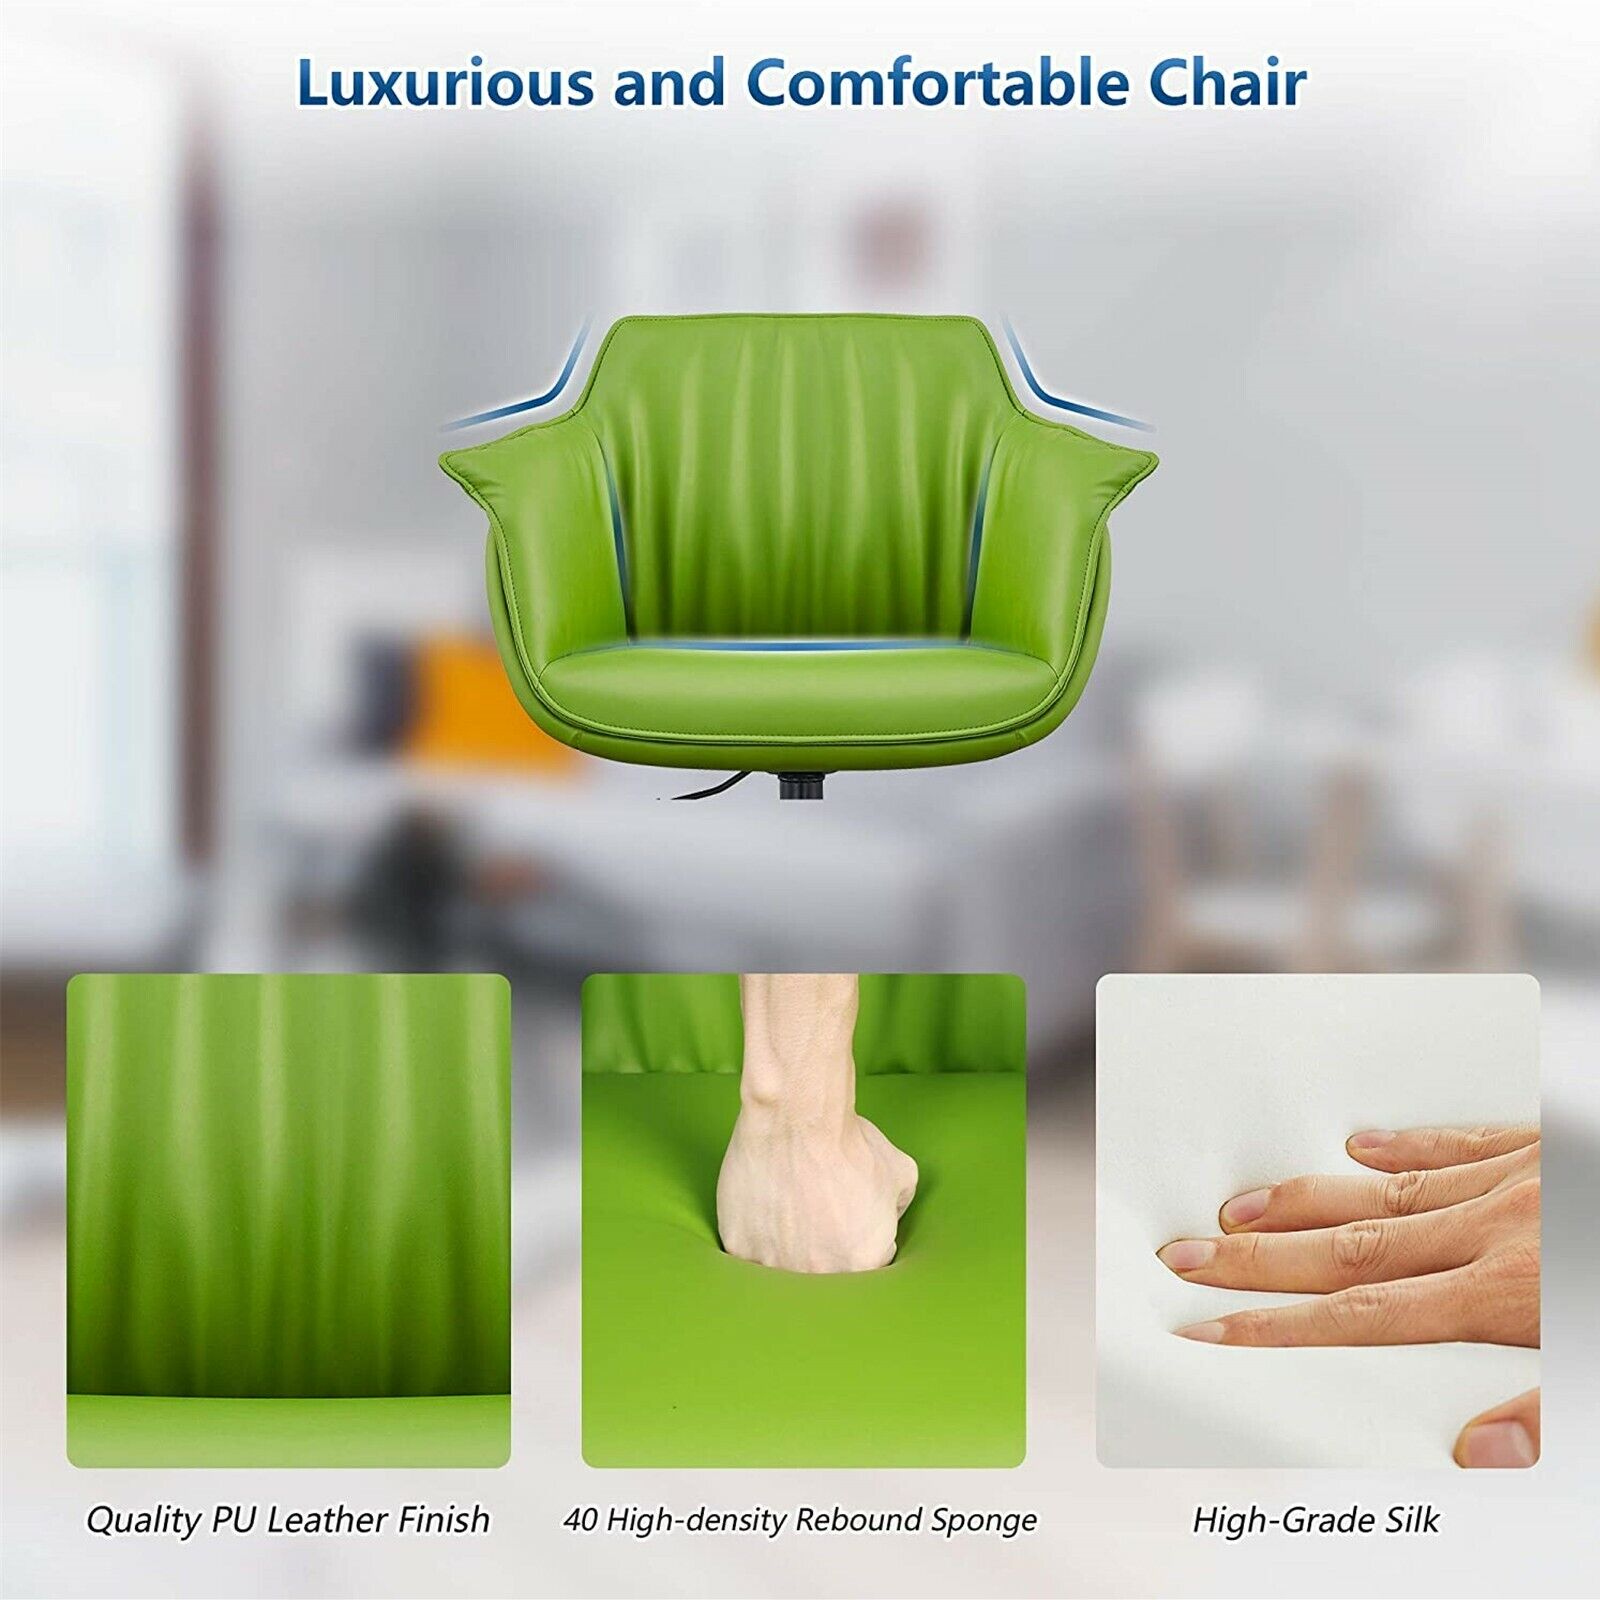 Low Back Swivel Chair for Desk With Adjustable Height Handle Office Armchair PU Leather Ergonomic Desk Chair, Green